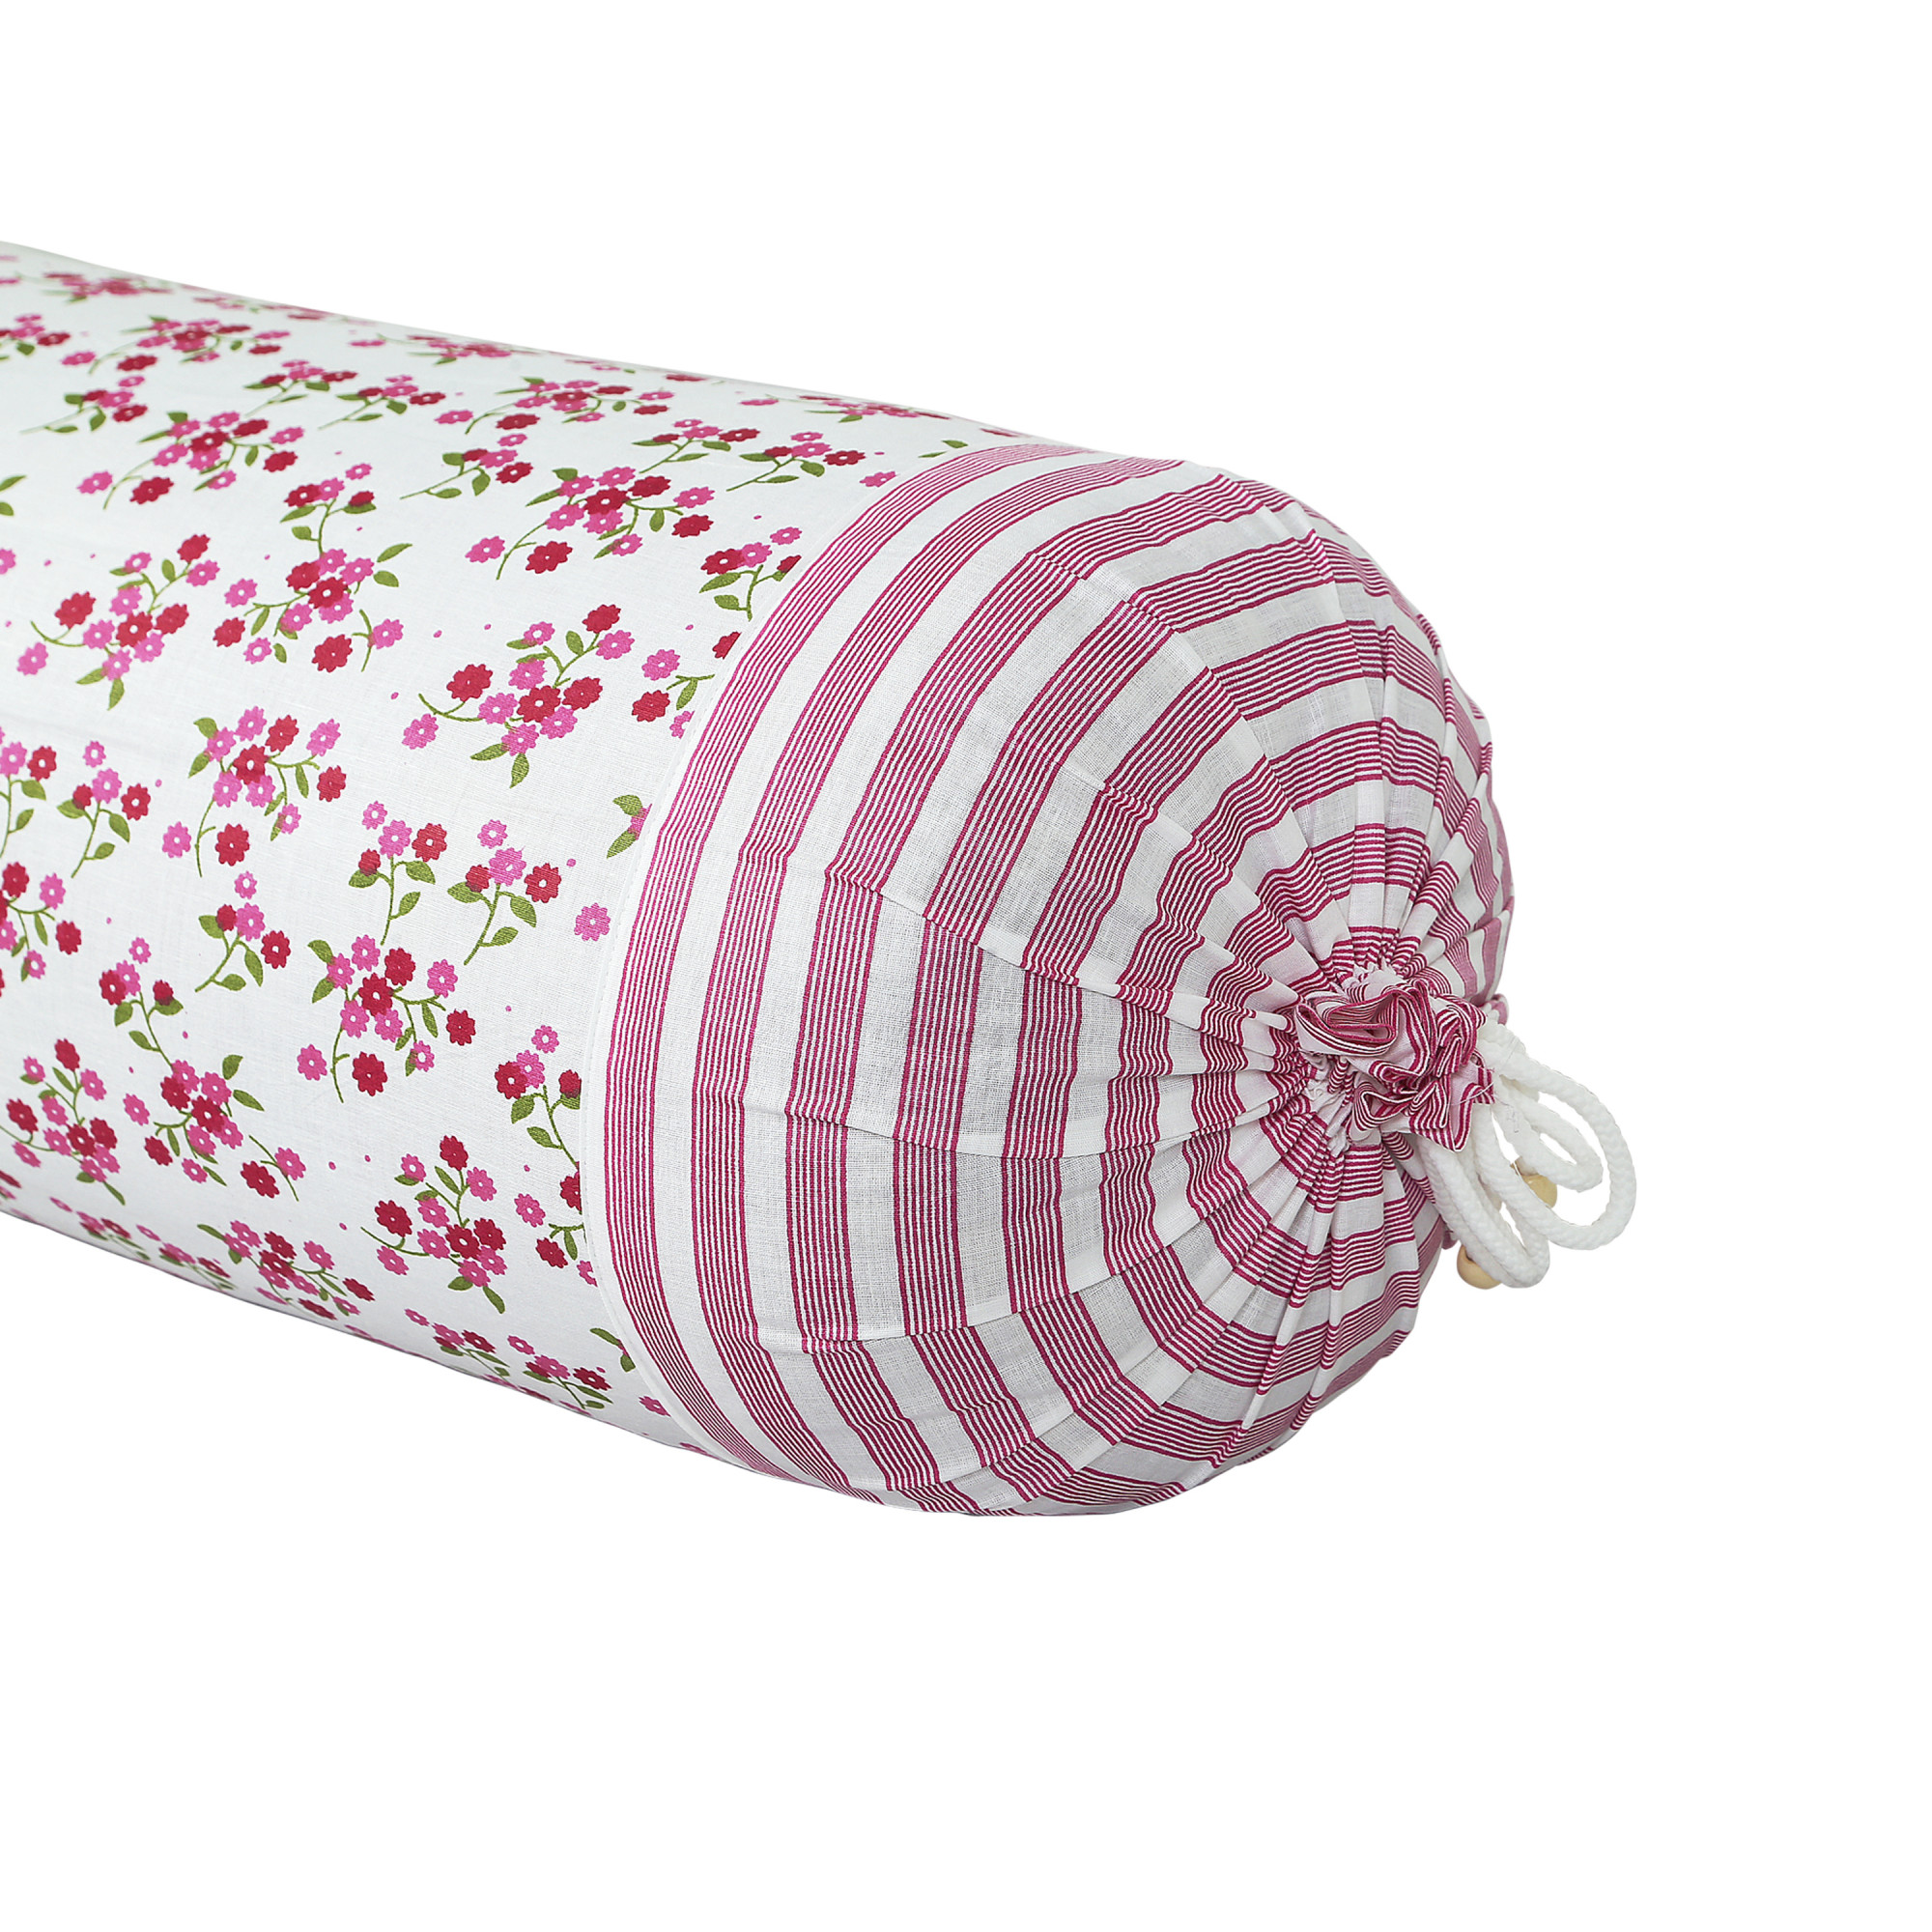 Kuber Industries Bolster Covers | Cotton Bolster Cover Set | Diwan Bolster Cover Set | Bolster Pillow Cover | Pink Flower Masand Cover | 16x32 Inch| White